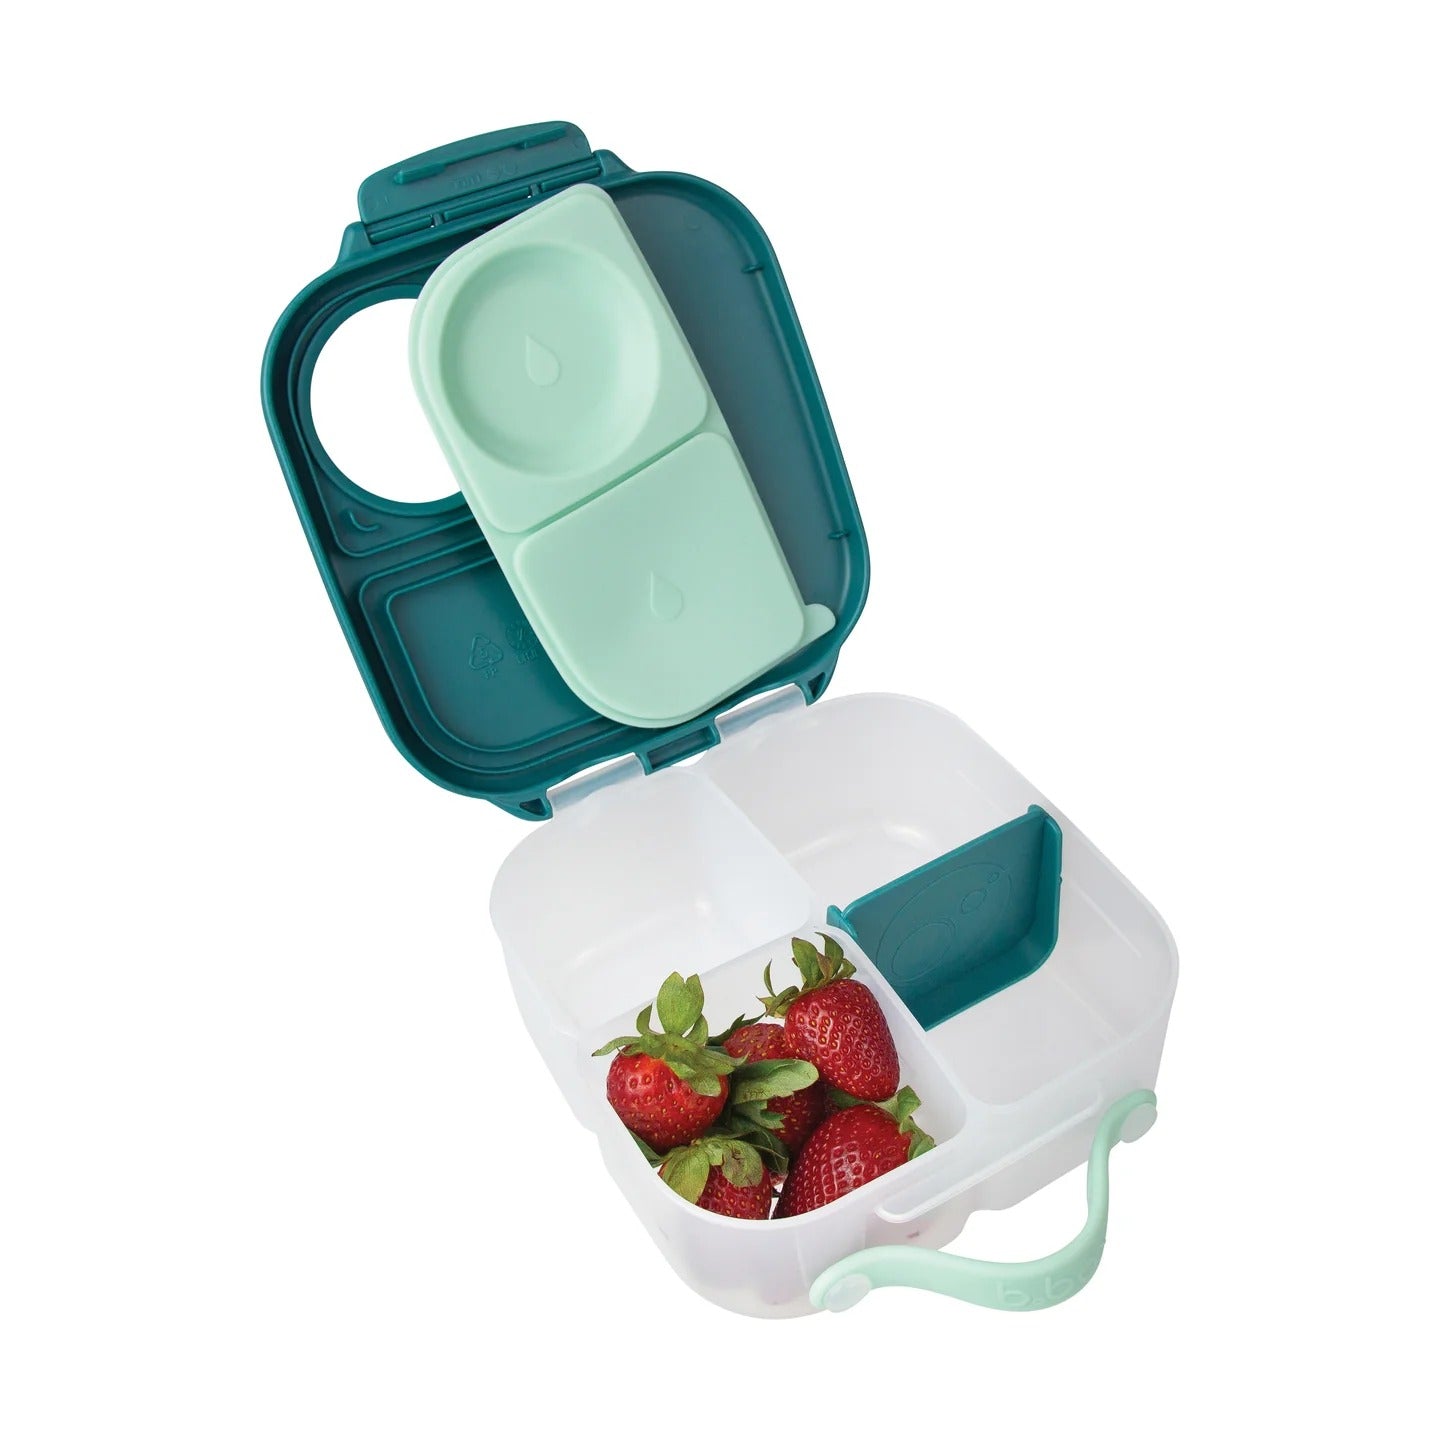 B.box Mini Lunchbox in Emerald Forest available at Bear & Moo